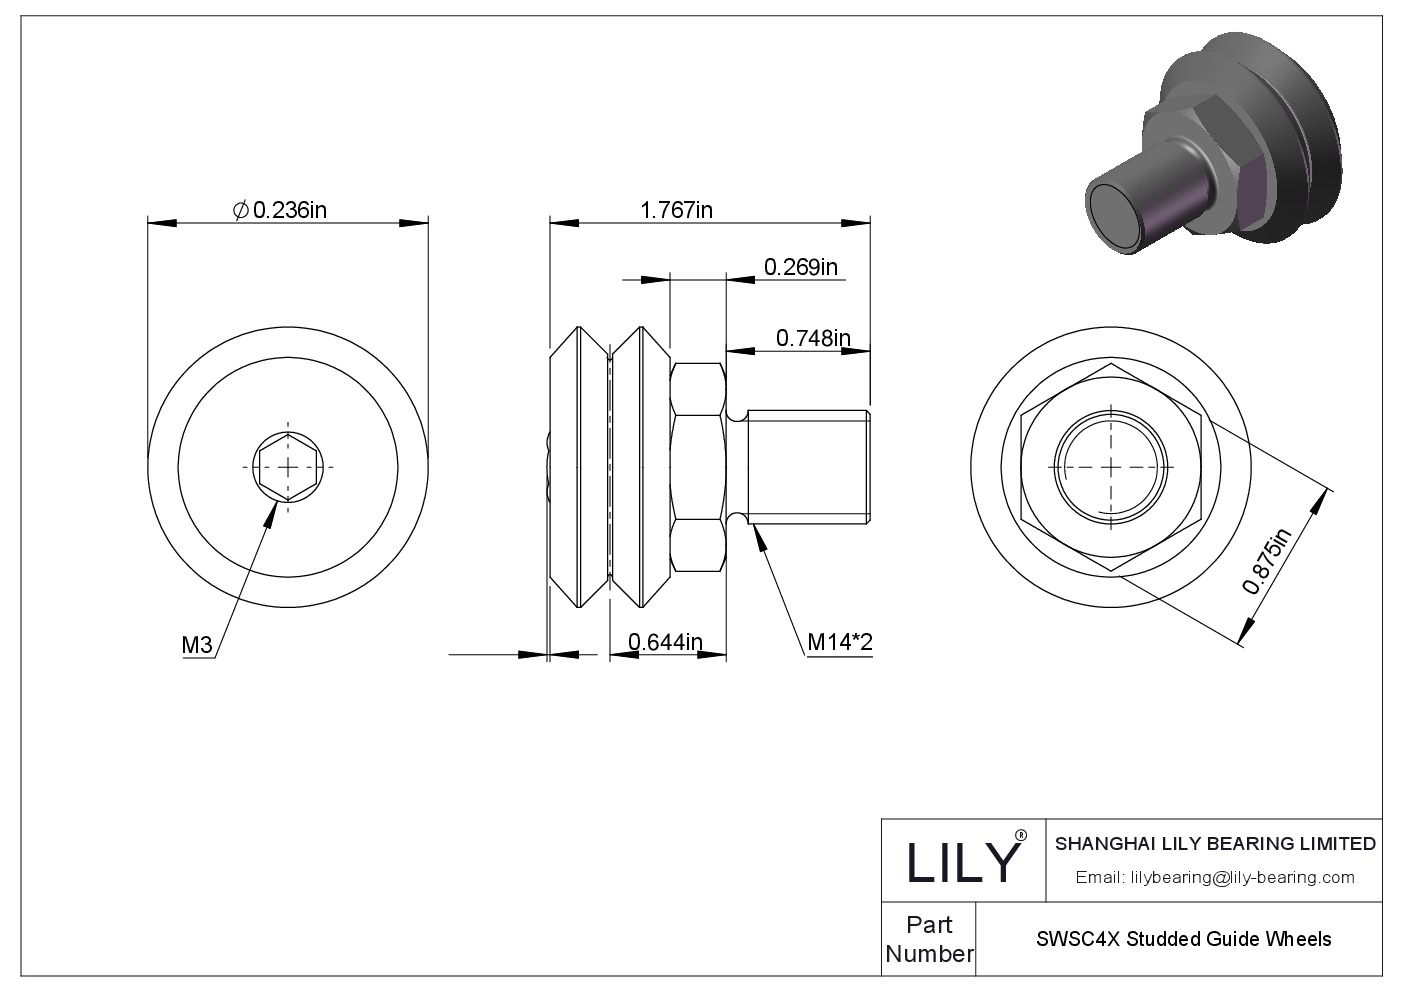 SWSC4X Studded Guide Wheels cad drawing